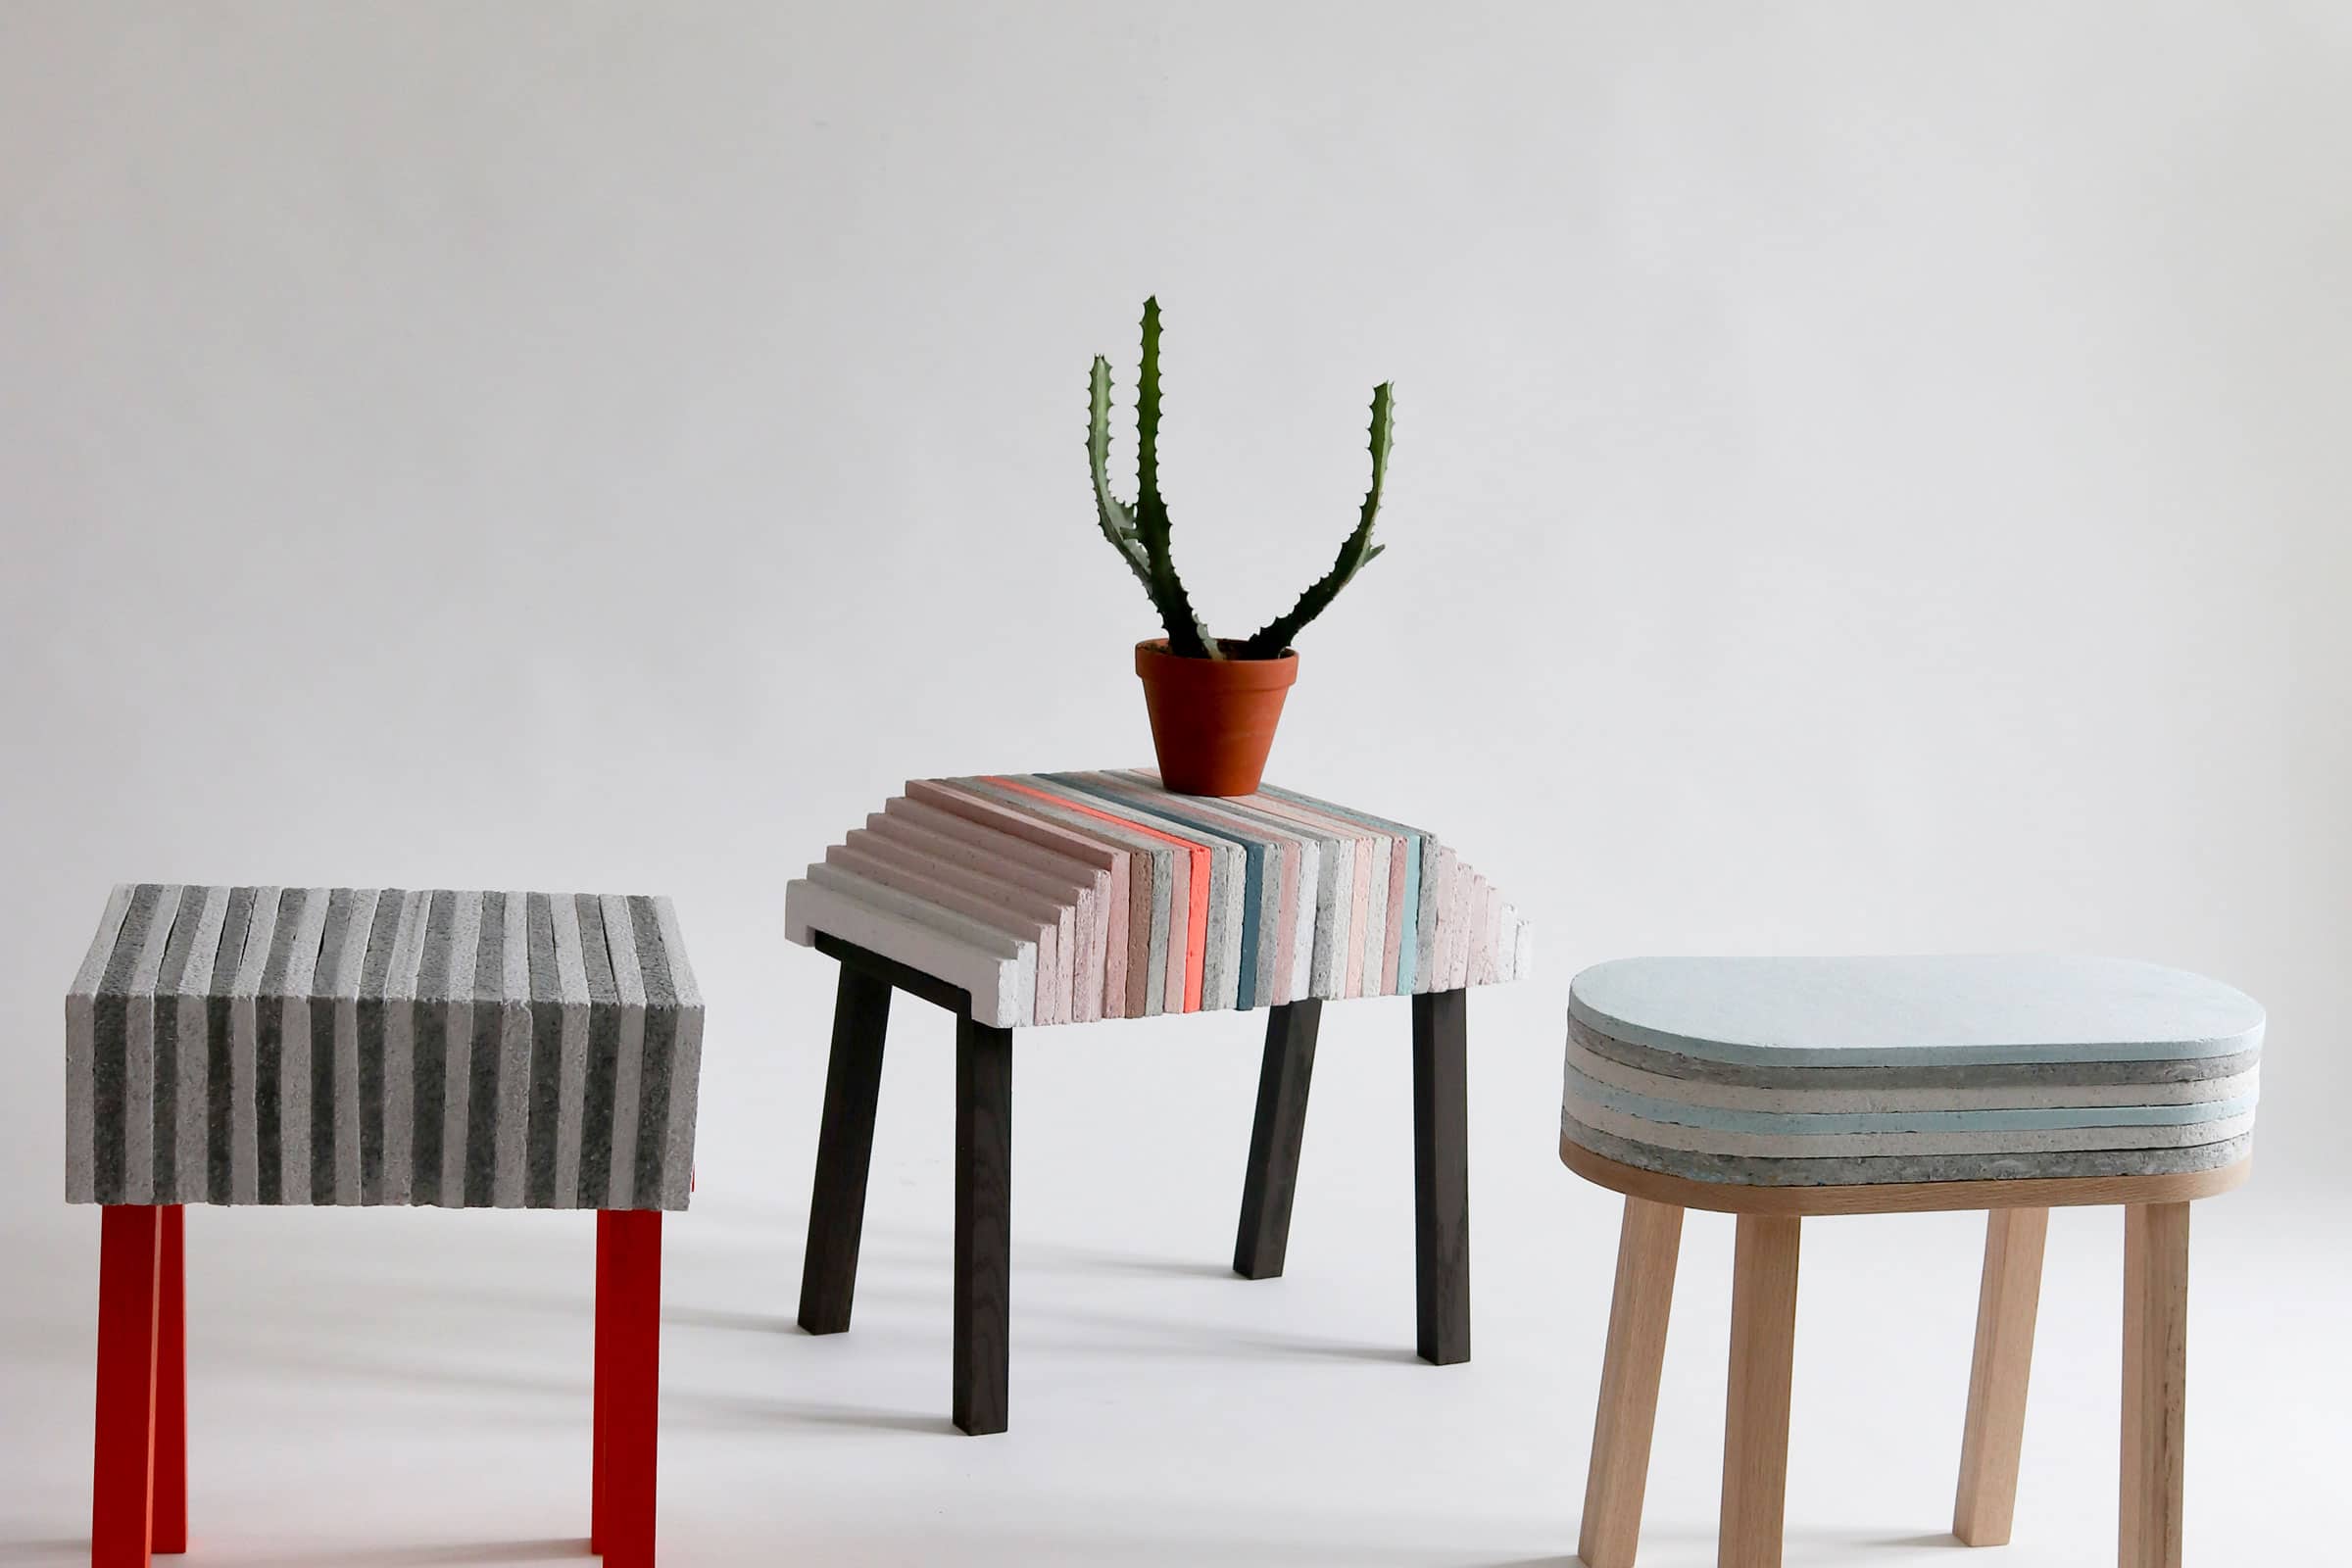 How Montreal’s Dear Human is Using Recycled Paper to Make Playful Stools